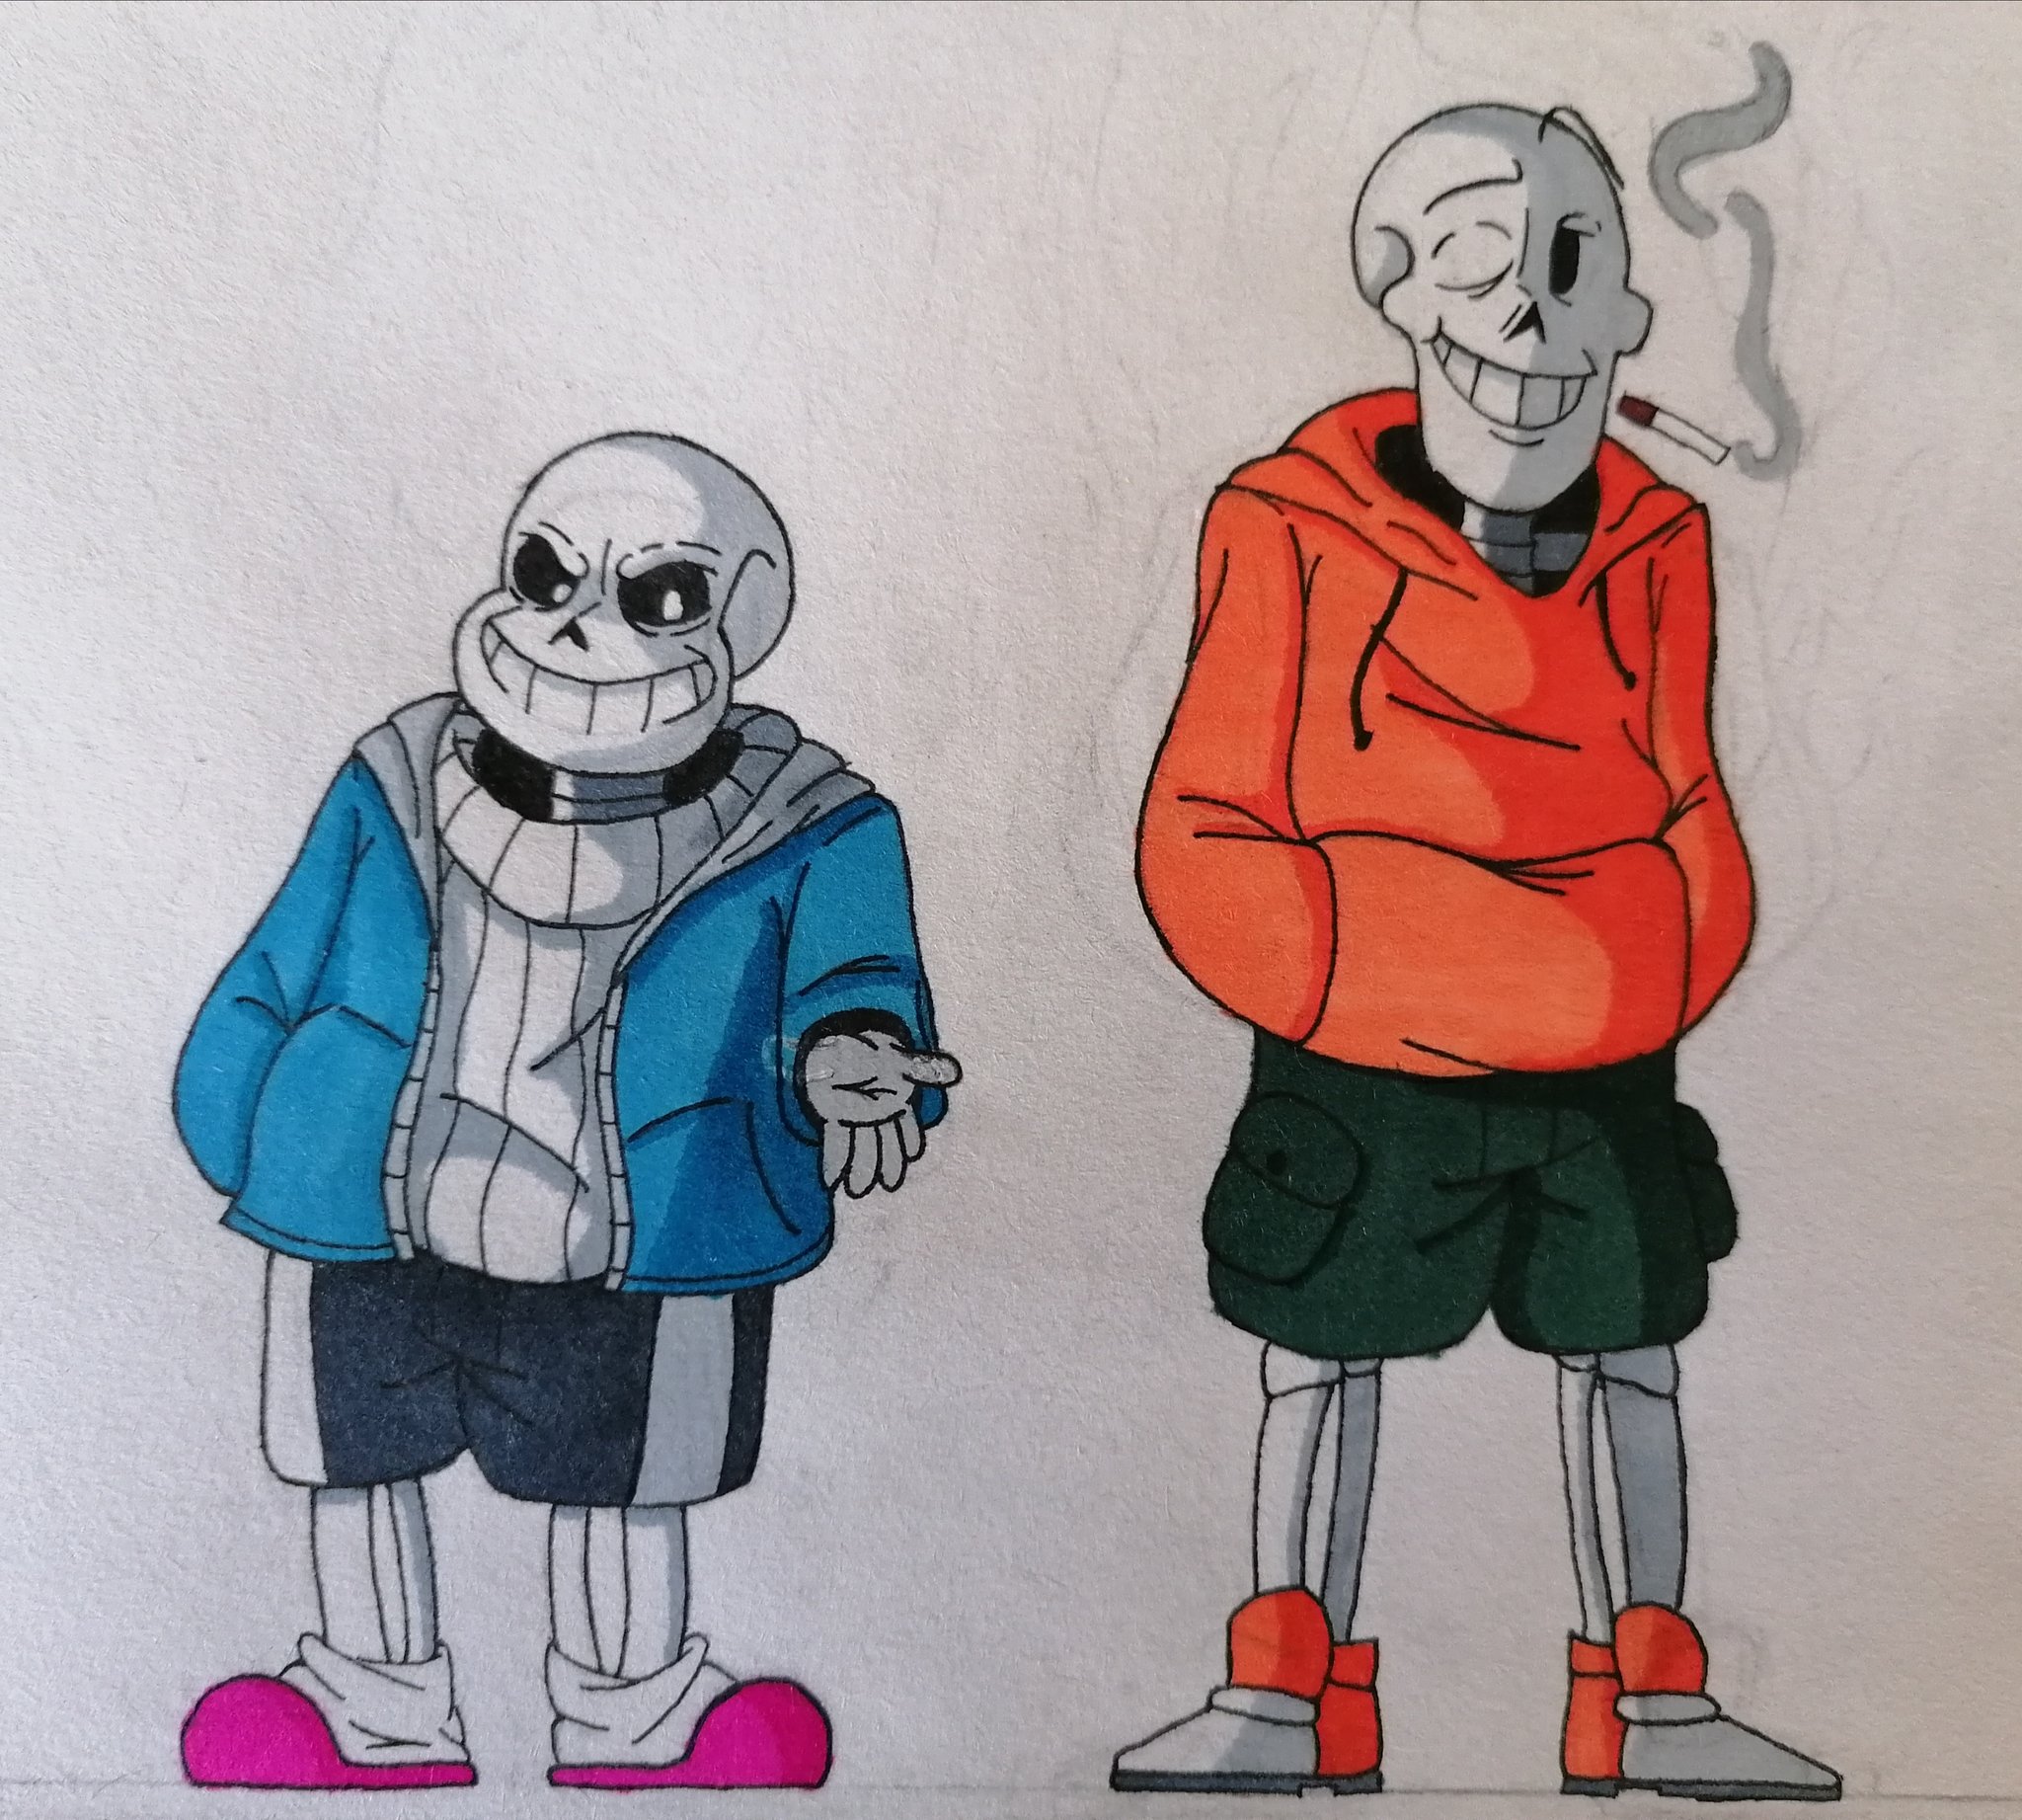 on Twitter: "RT @LoxyDraw: Finish my Double Bad Time drawing #undertale #underswap https://t.co/bYrywbHTUC" /